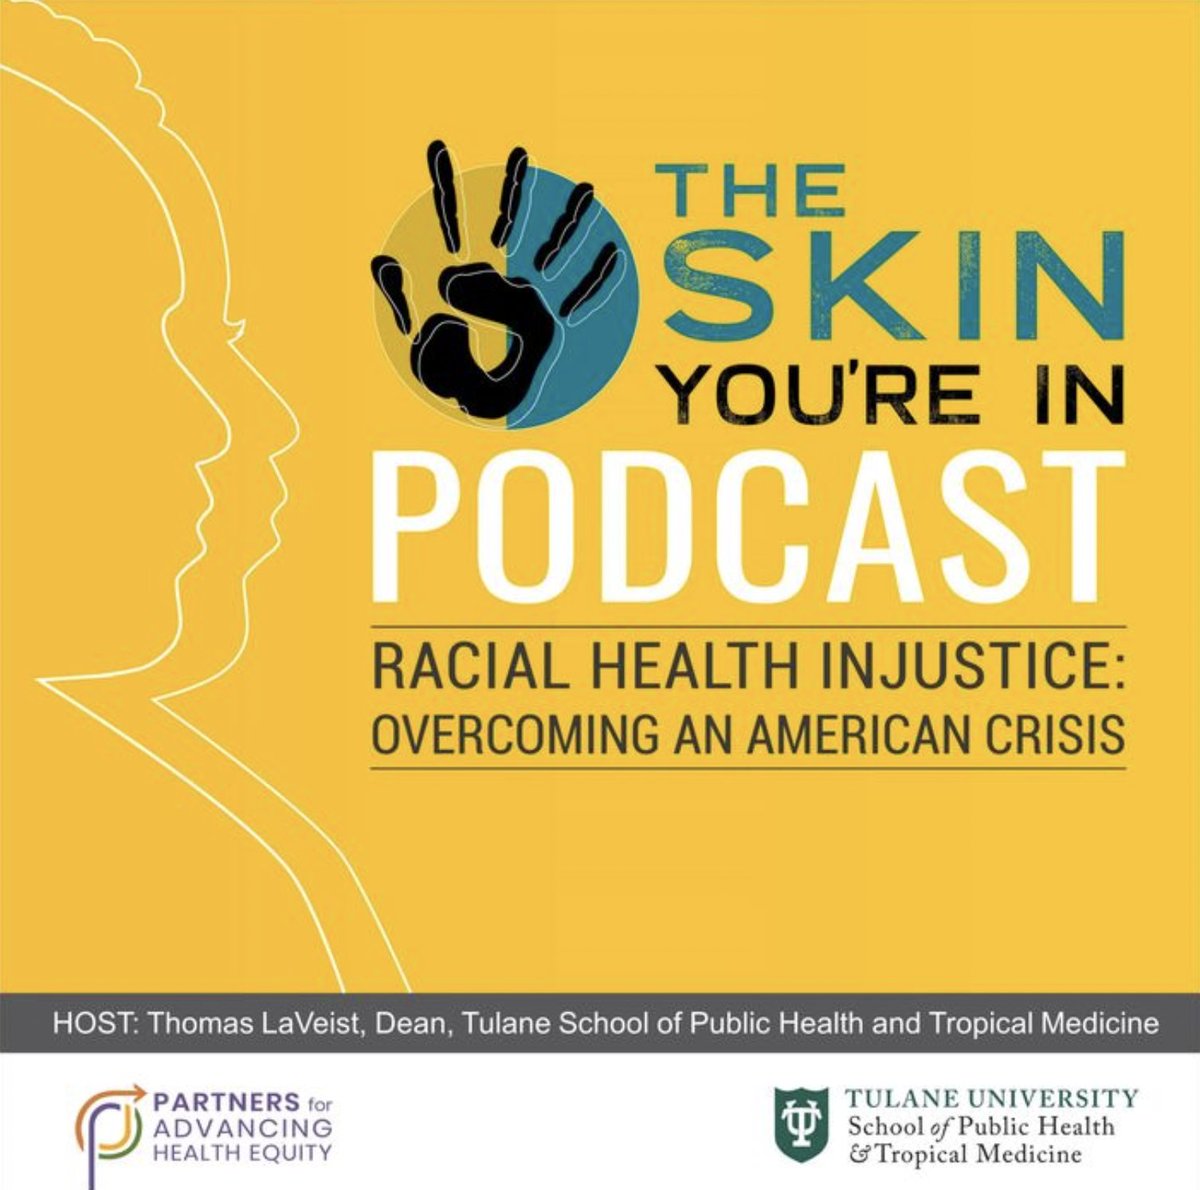 'The Skin You're In' 🎙️ podcast features experts researching, and individuals experiencing, gaps in healthcare access & care. @TulaneSPHTM 

Listen now 👉🏼 spreaker.com/show/the-skin-…

#HealthJustice #HealthEquity